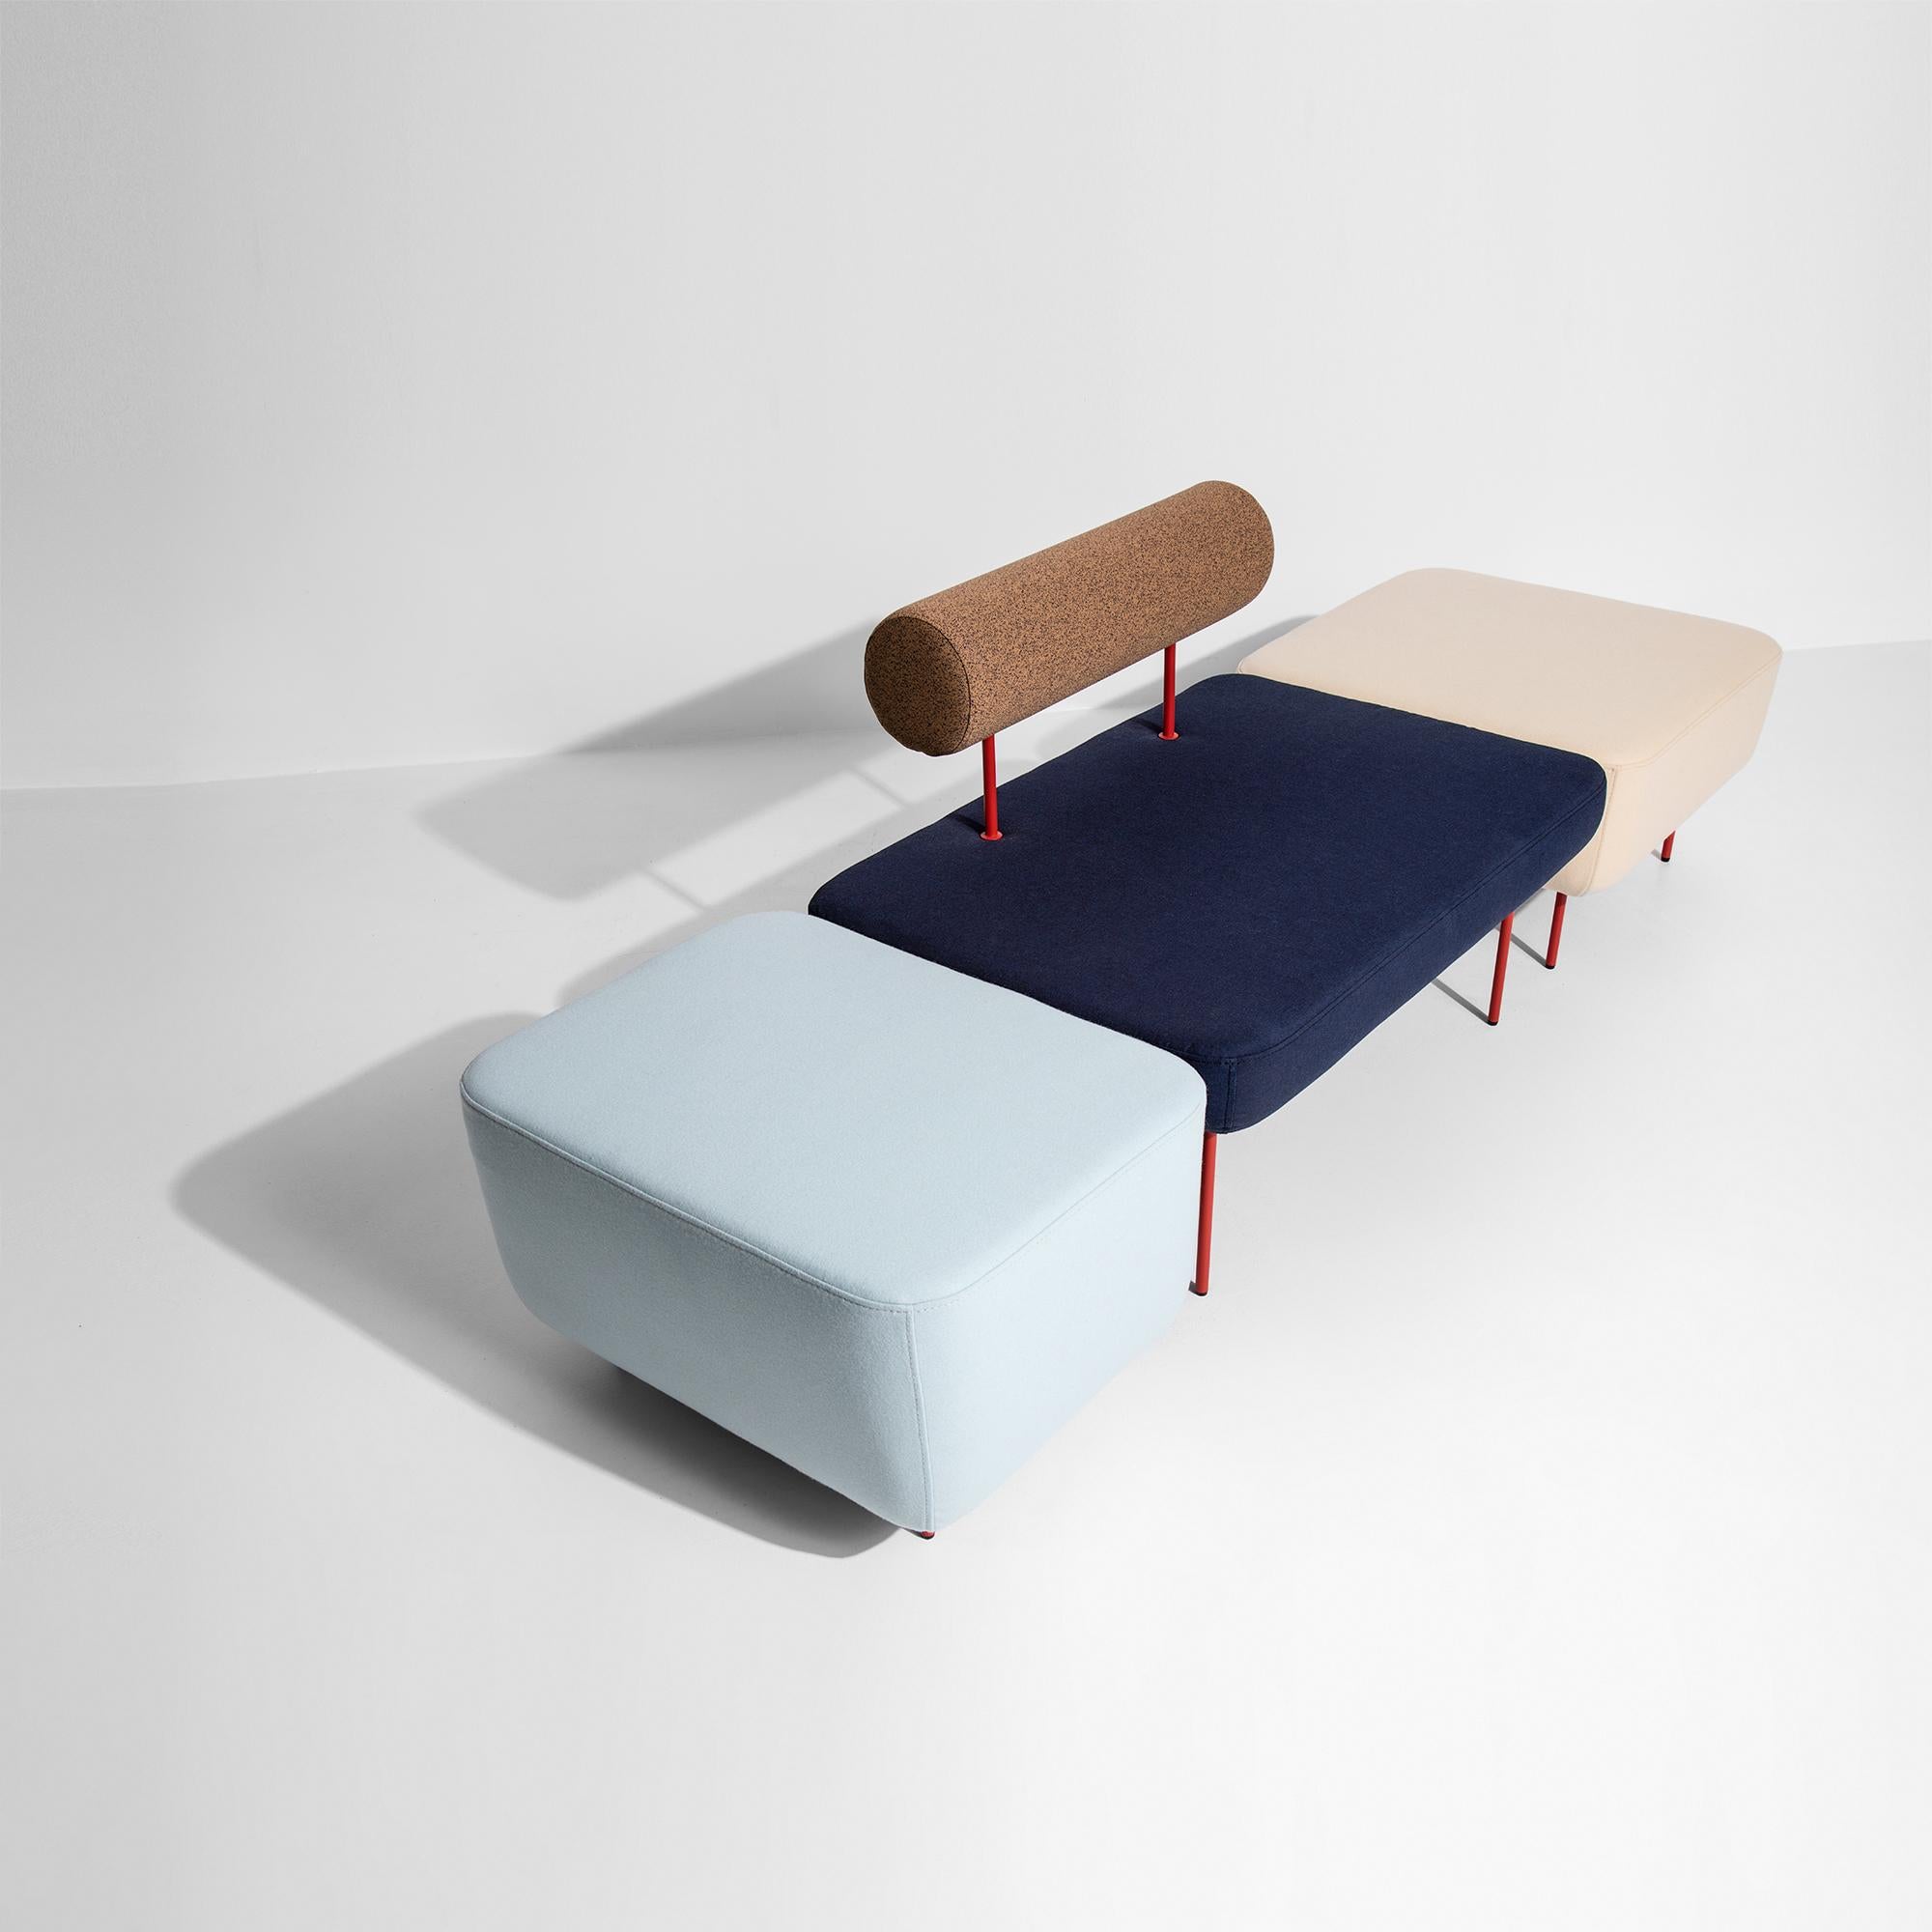 Contemporary Petite Friture Small Hoff Stool in Blue by Morten & Jonas, 2015 For Sale